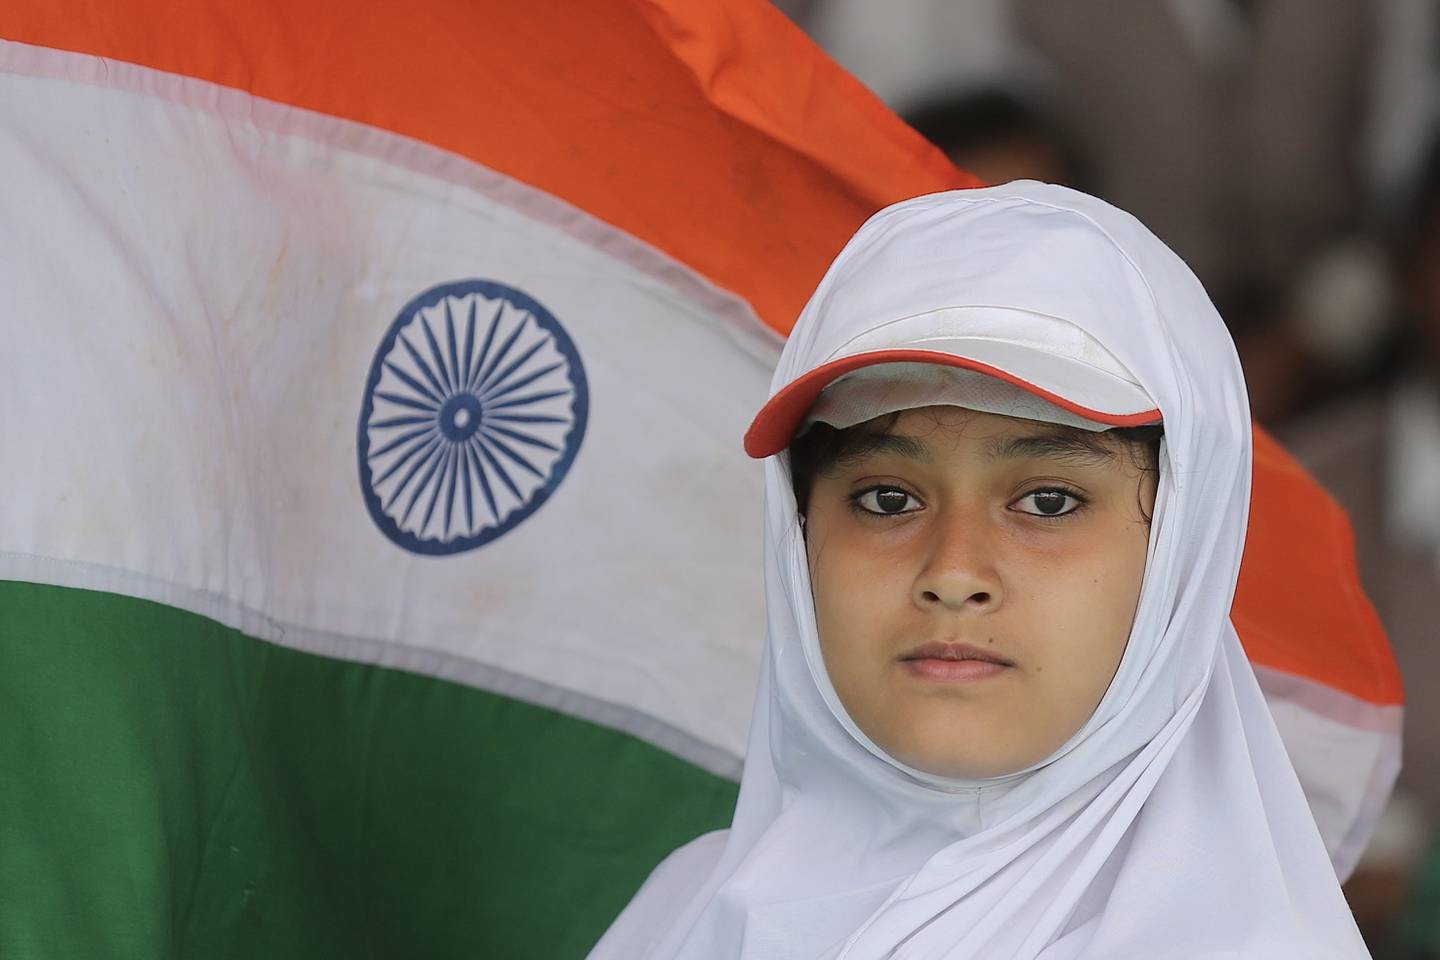 A school pupil stands in front of the Indian flag during a full dress rehearsal for celebrations, ahead of the 75th Independence Day in Bengaluru. EPA